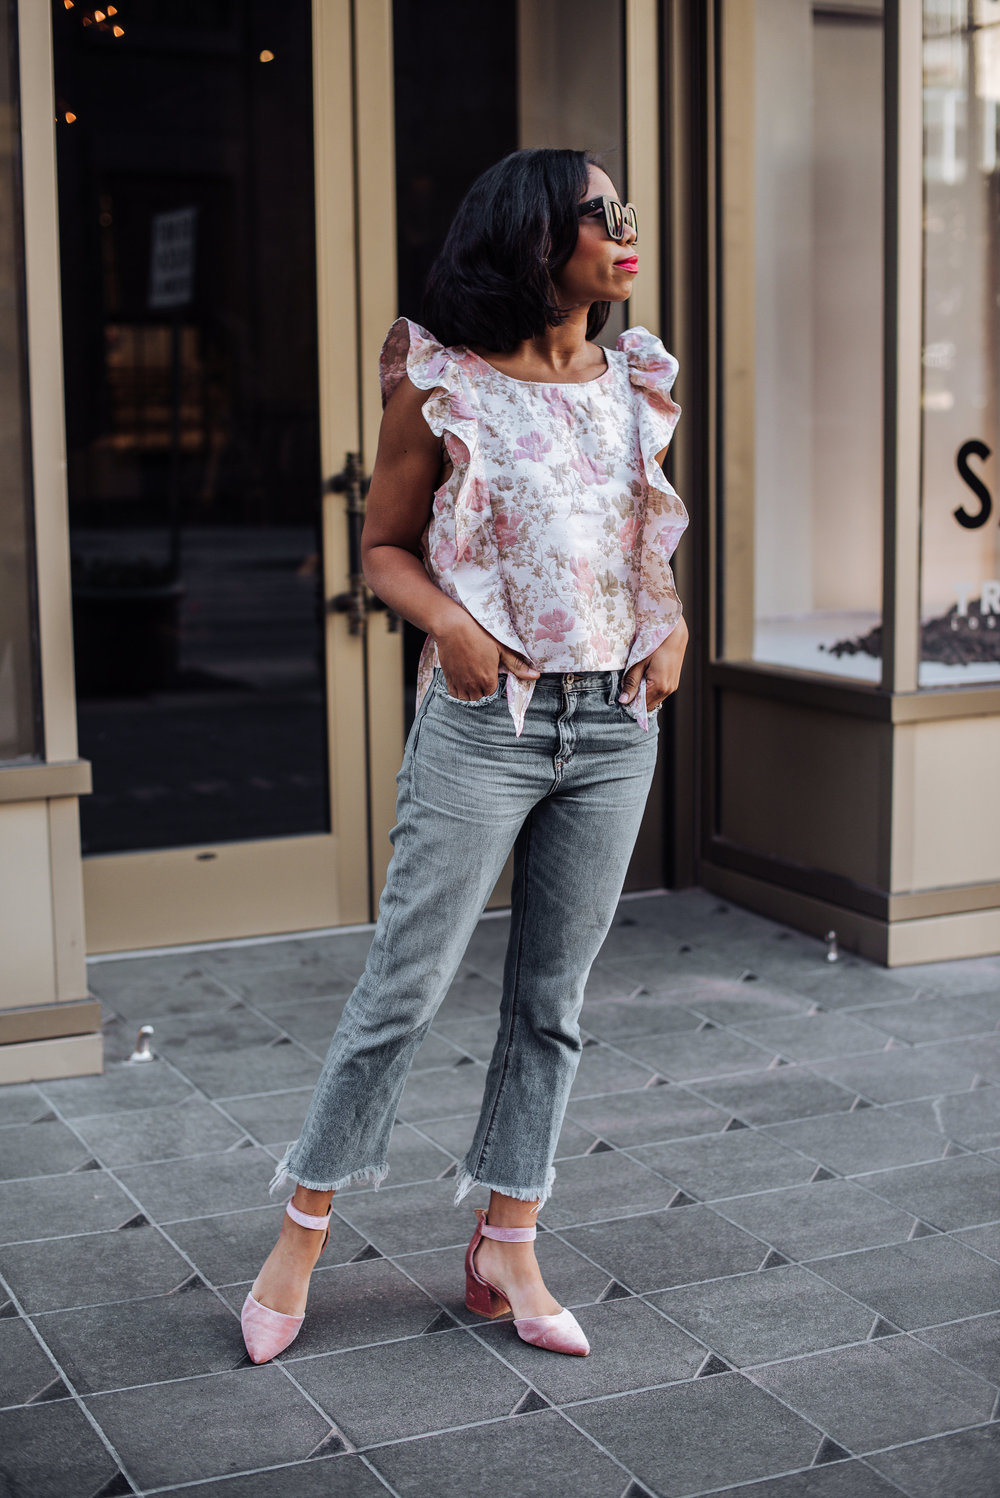 styling shoes top spring shoe styles dallas fashion blogger 